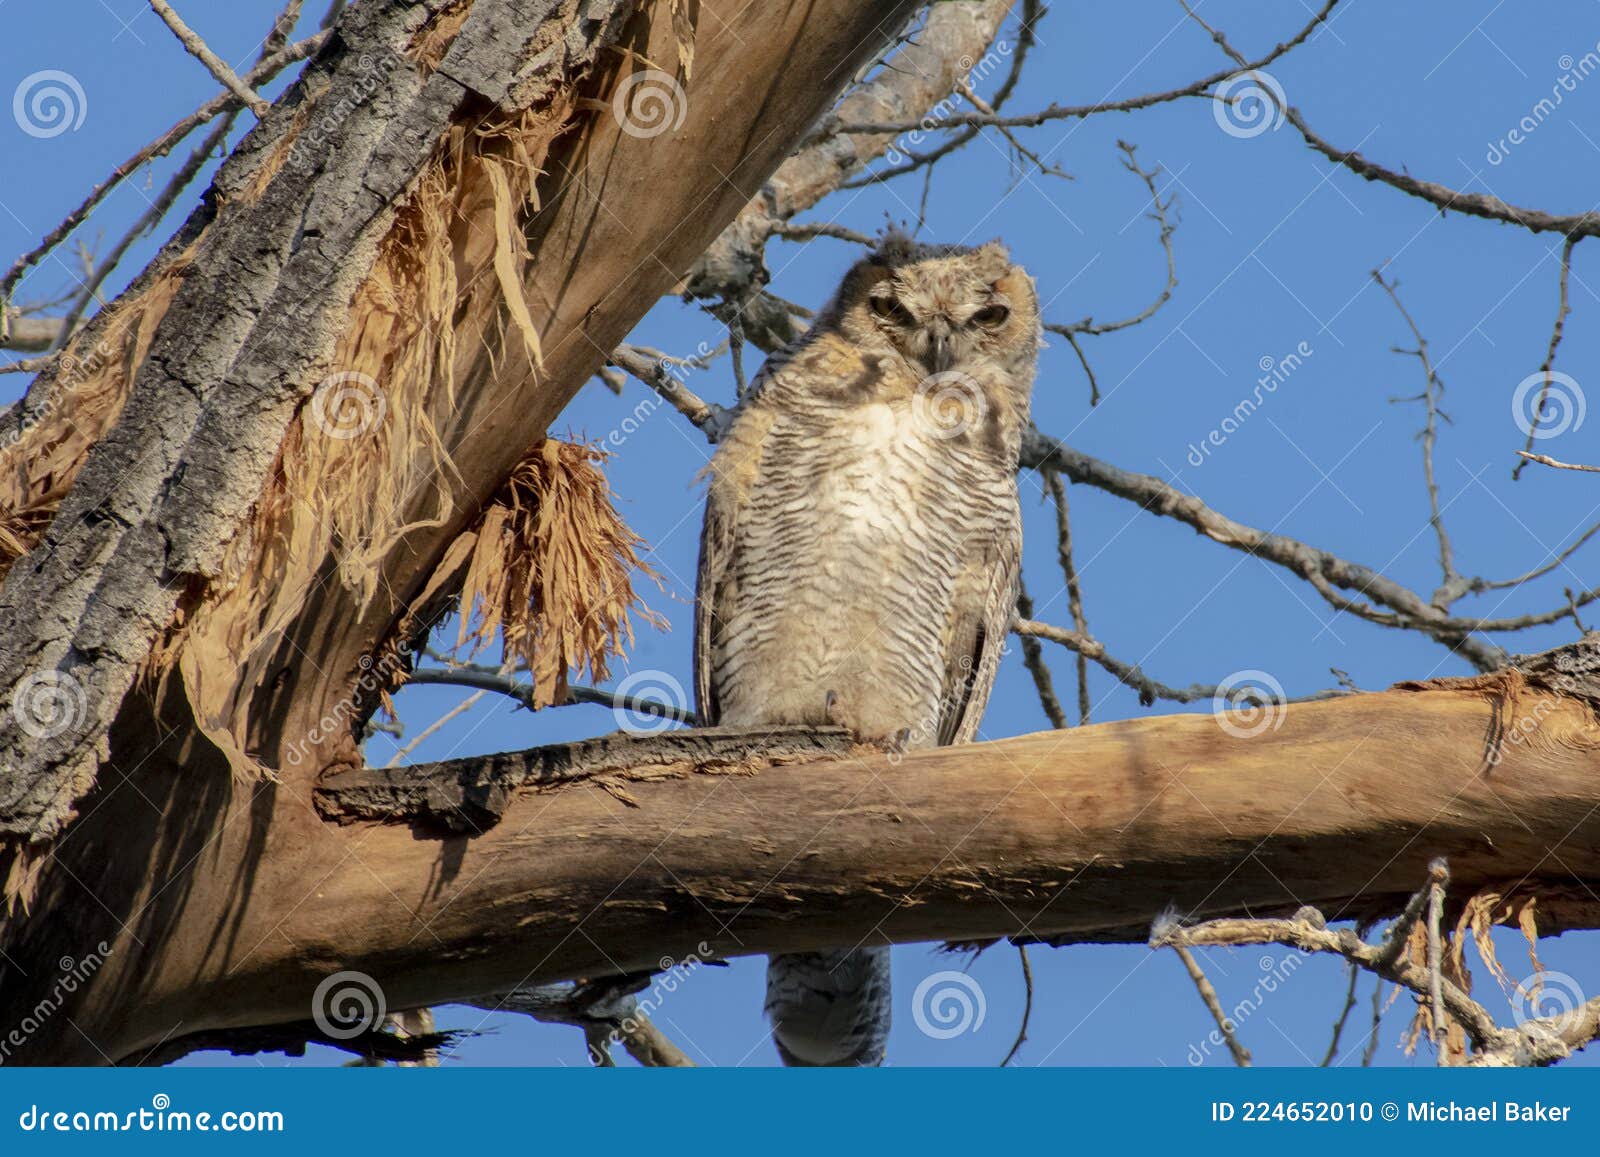 watchful great horn owlet